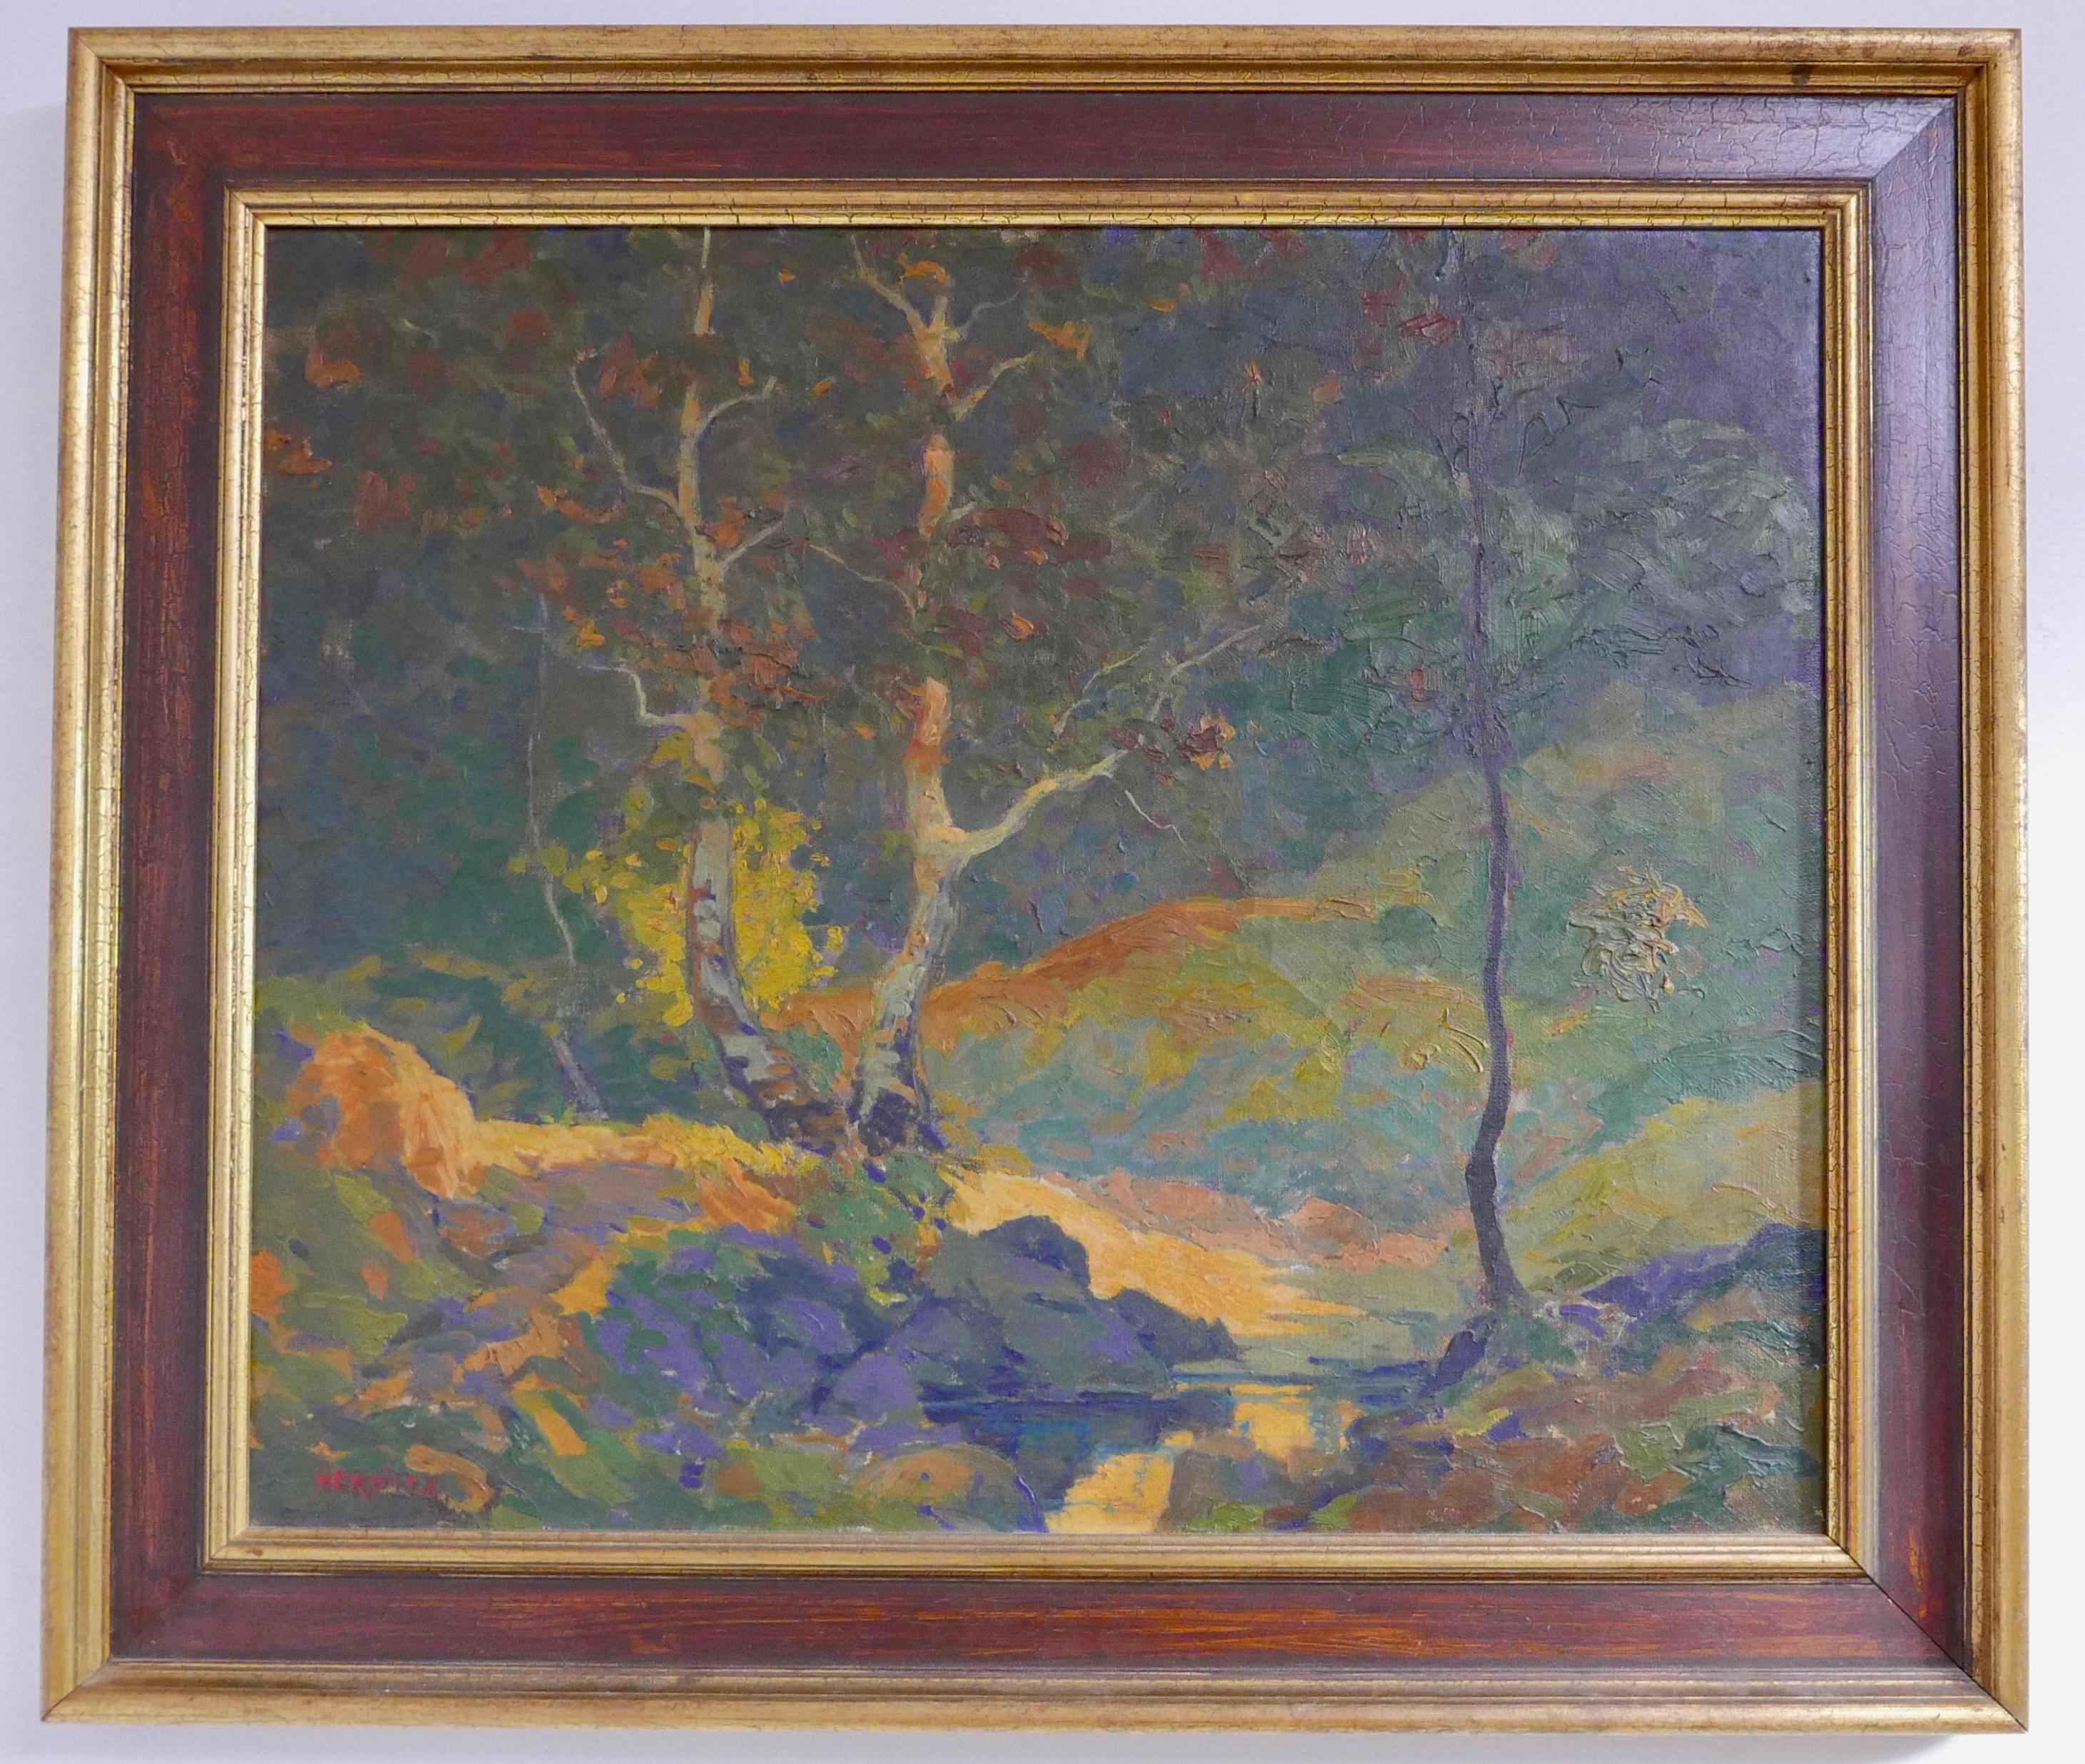 Abstract/ Impressionist Landscape by Russian/American William N. Horwitz, c 1924 4